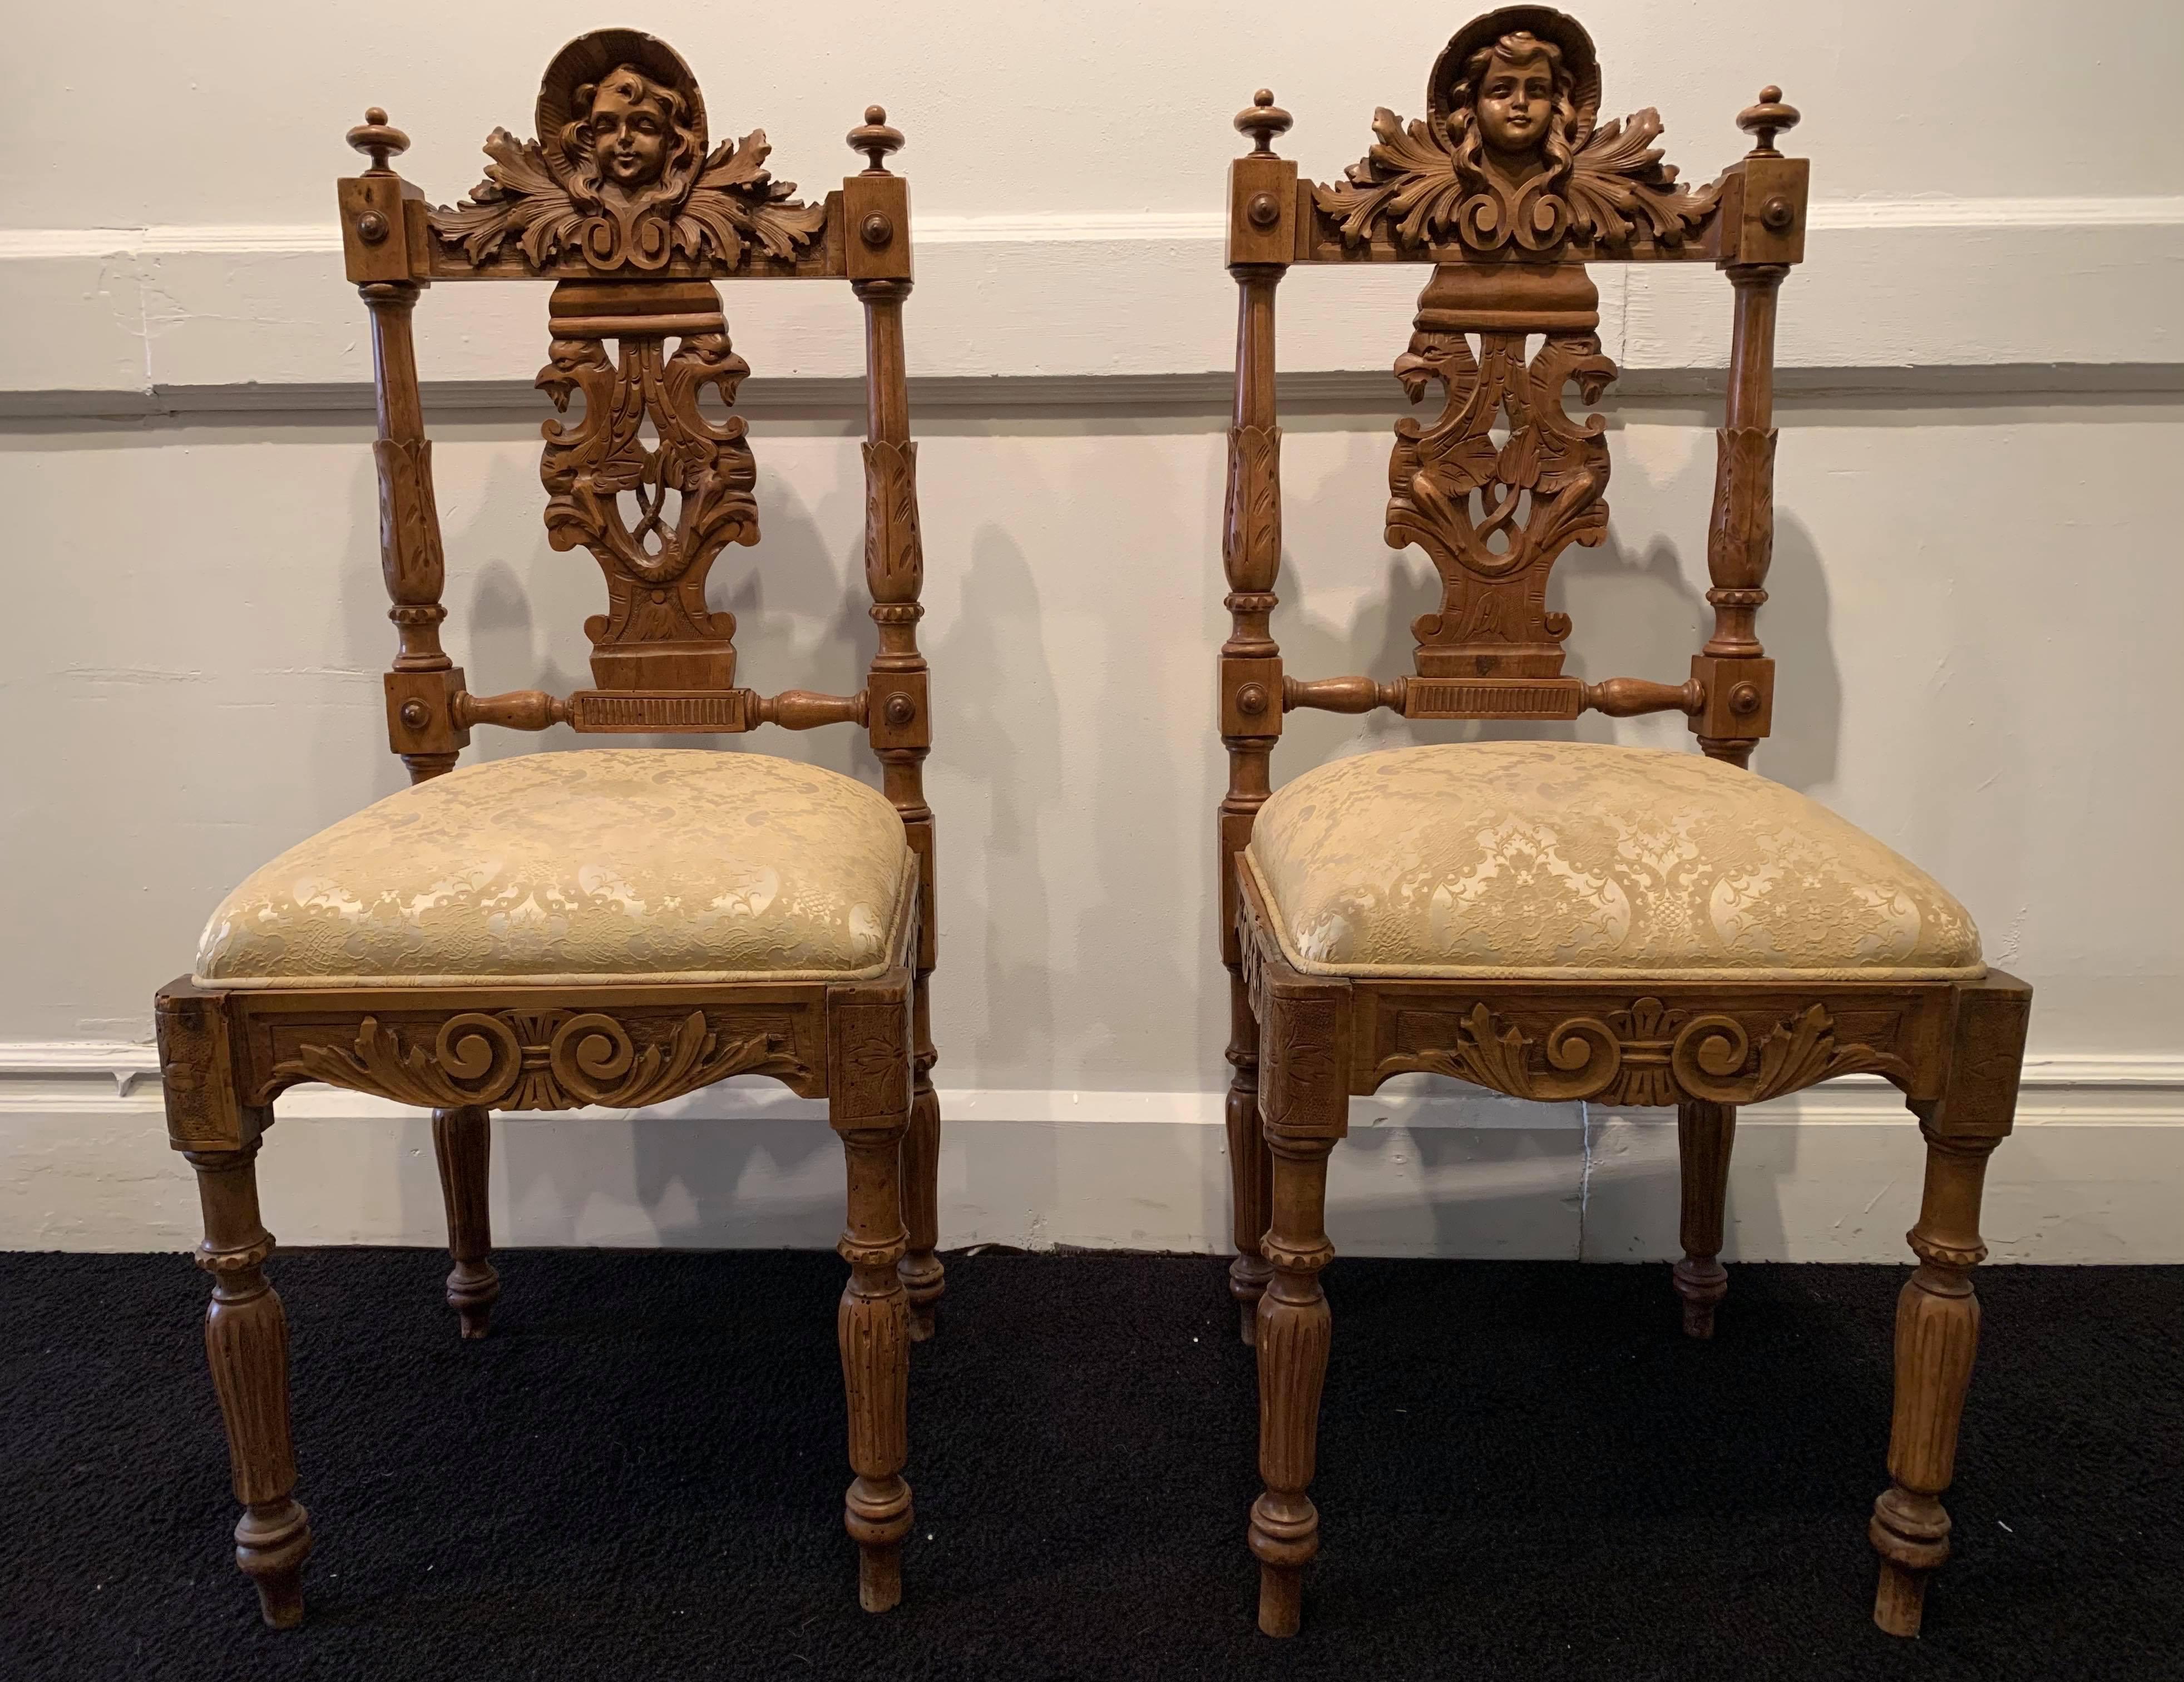 Unknown Figurative Sculpture - 19th Century Pair of Hand-Carved Hall Chairs from Mexico